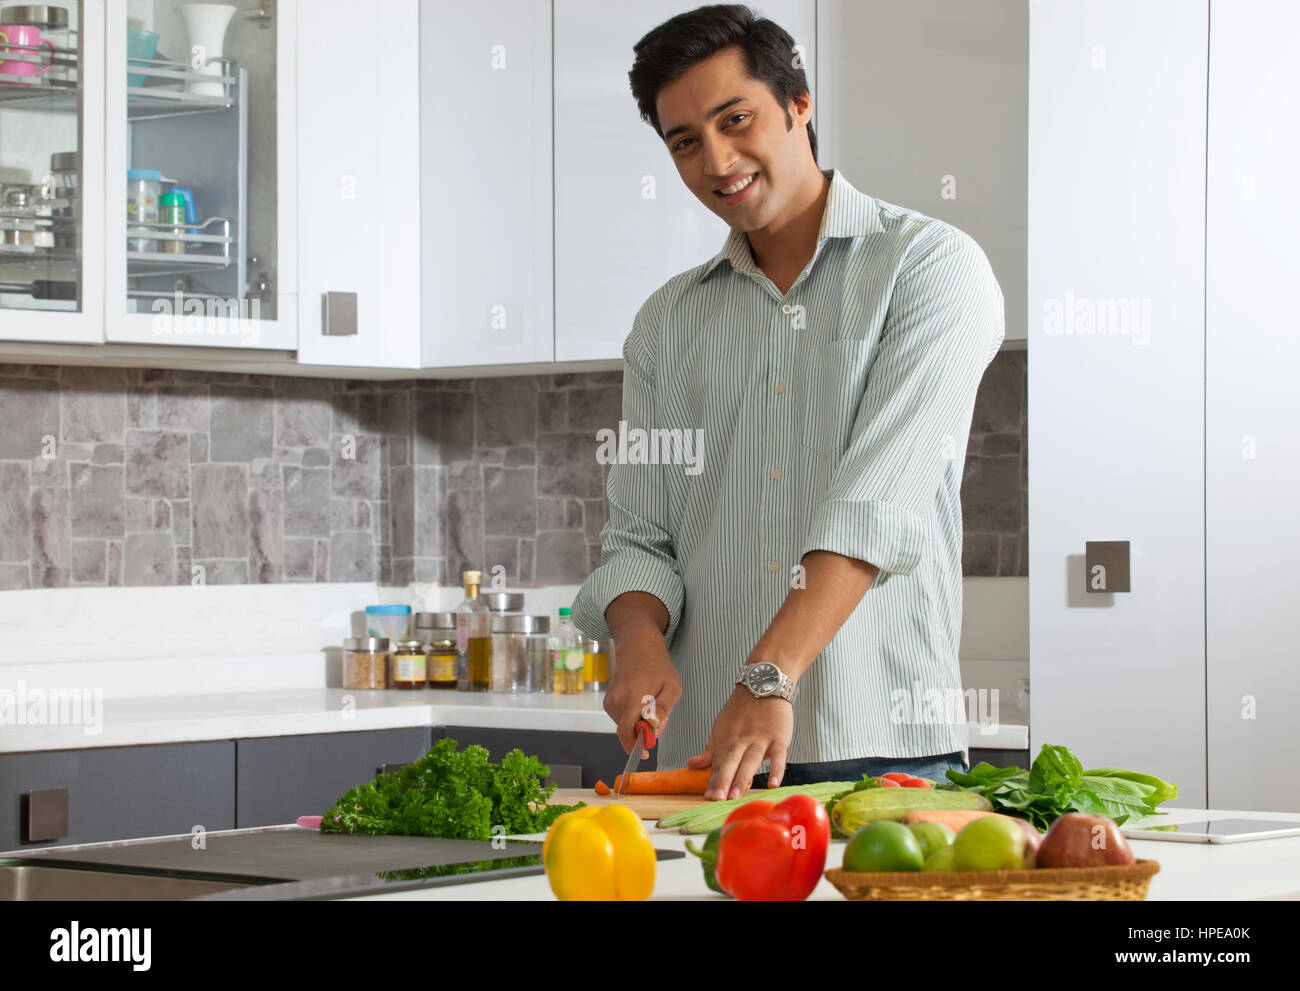 Man cutting carrot in domestic kitchen Stock Photo